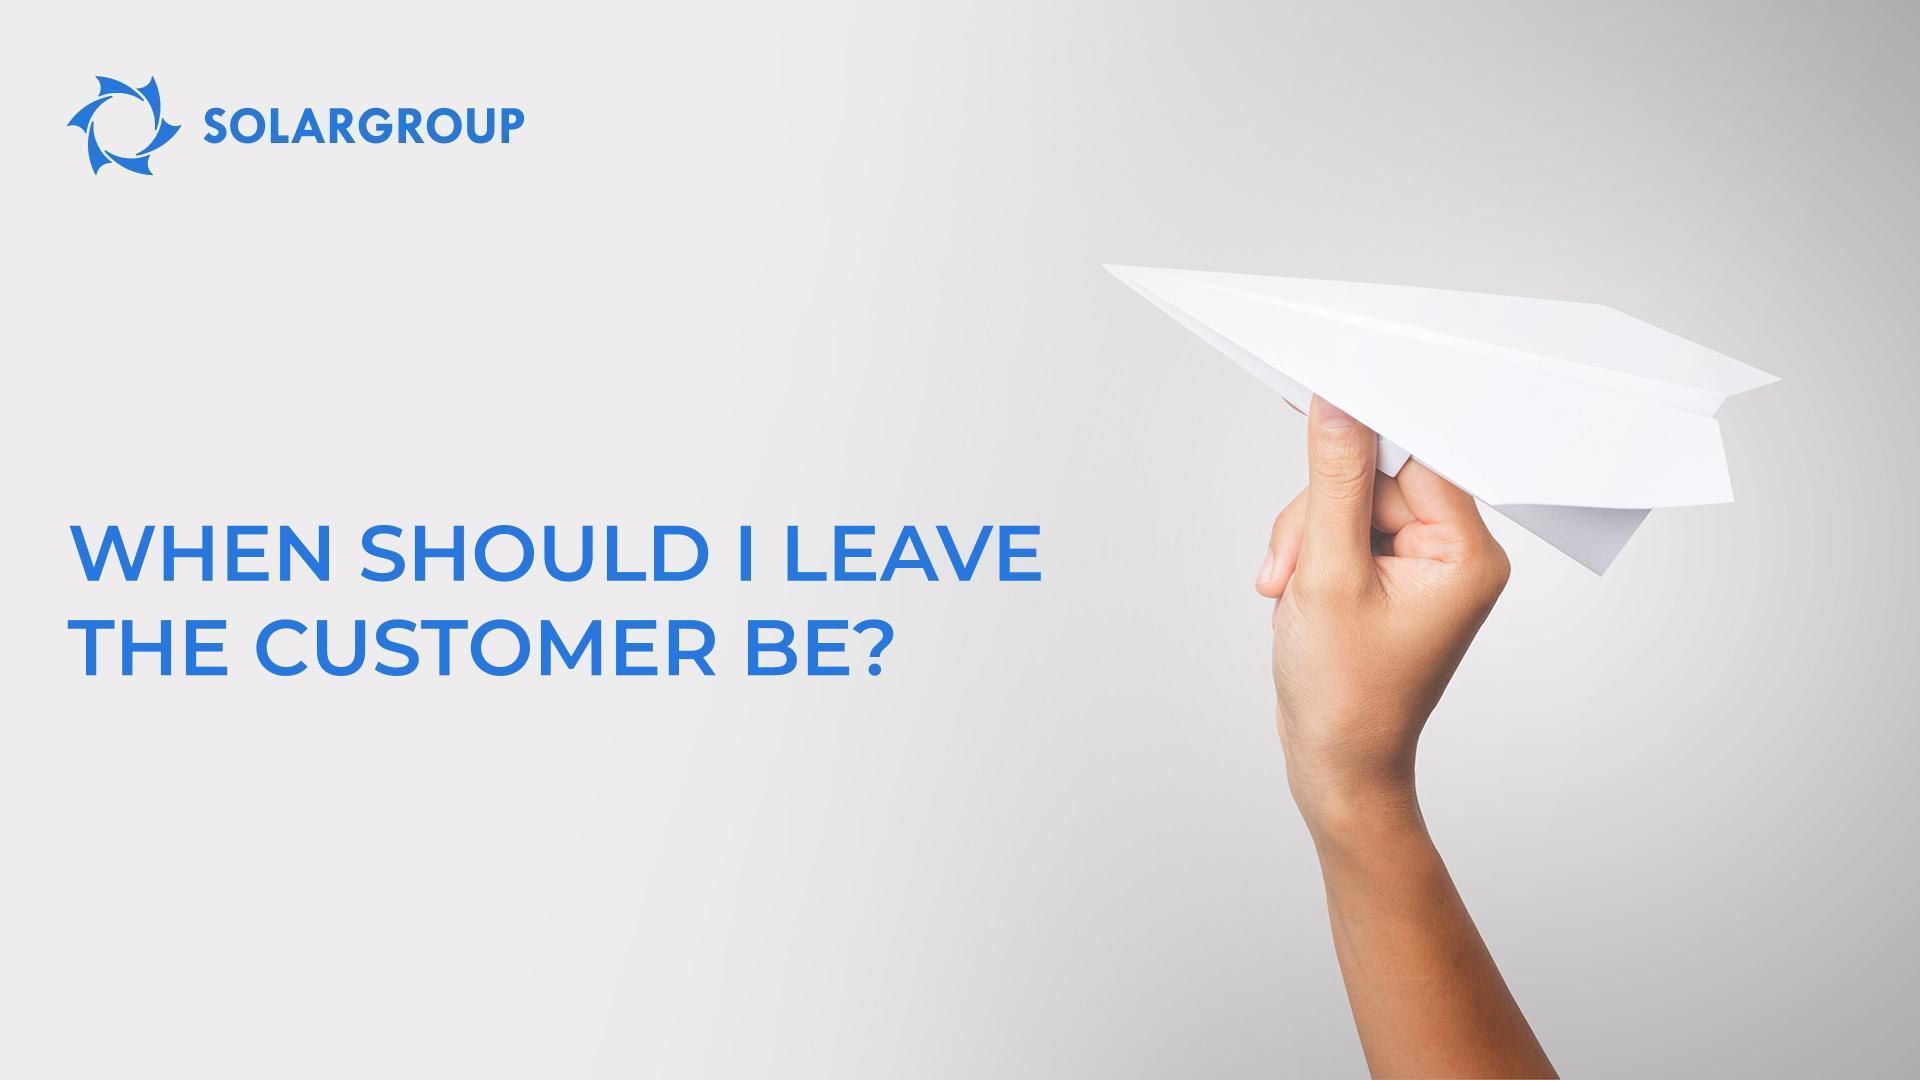 When should I leave the customer be?